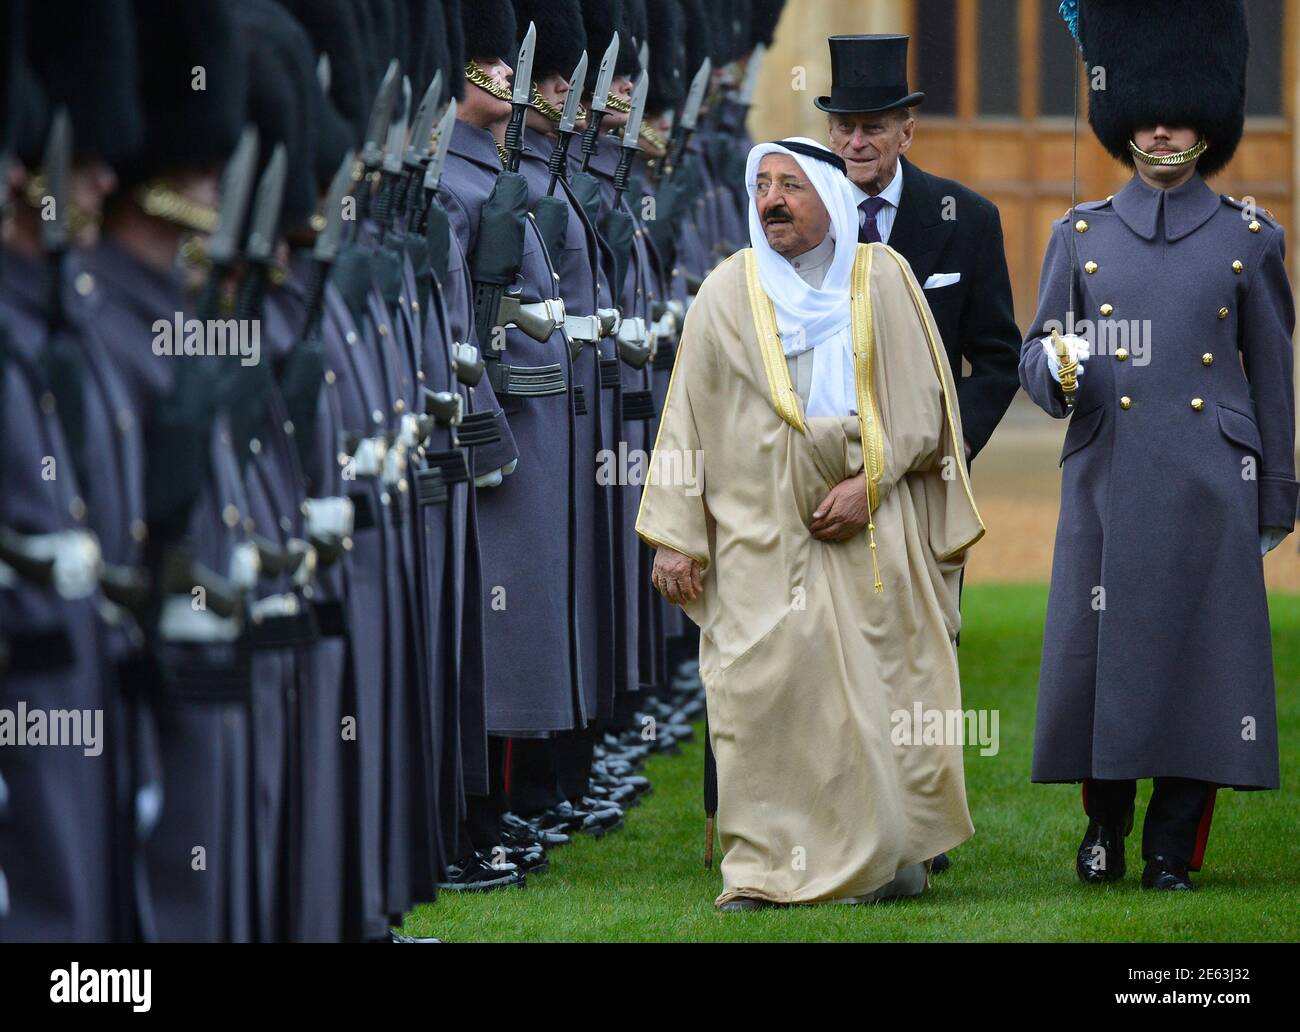 The Emir of Kuwait, Sheikh Sabah al-Ahmad al-Sabah (C), is followed by Britain's Prince Philip (2nd R) as he inspects members of the 1st Battalion Irish Guards at Windsor Castle in Windsor, southern England November 27, 2012. The Emir arrived at Windsor Castle on Tuesday for the start of a state visit to Britain.    REUTERS/Toby Melville (BRITAIN - Tags: ENTERTAINMENT POLITICS SOCIETY ROYALS) Stock Photo